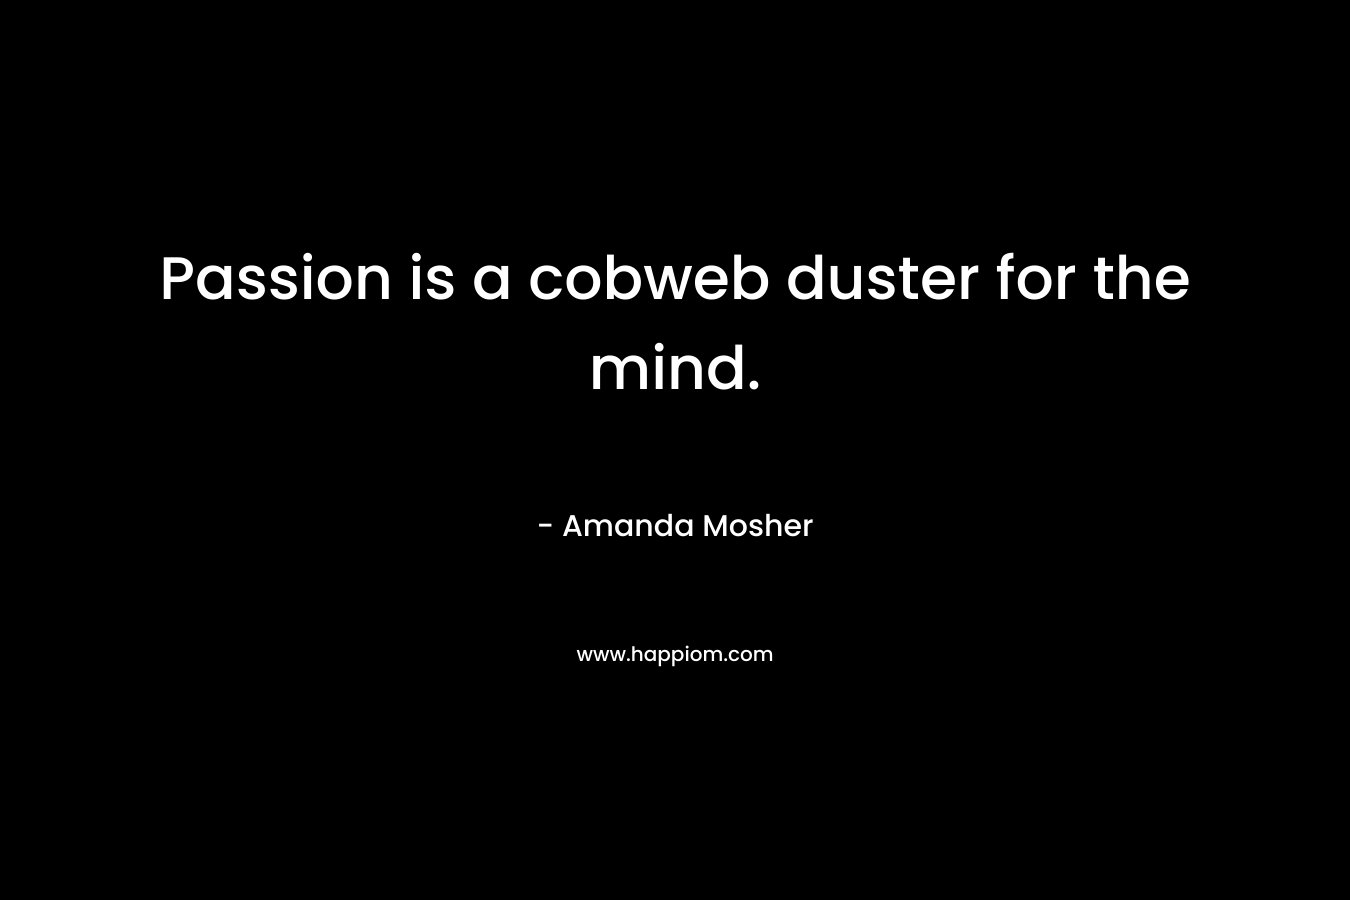 Passion is a cobweb duster for the mind.